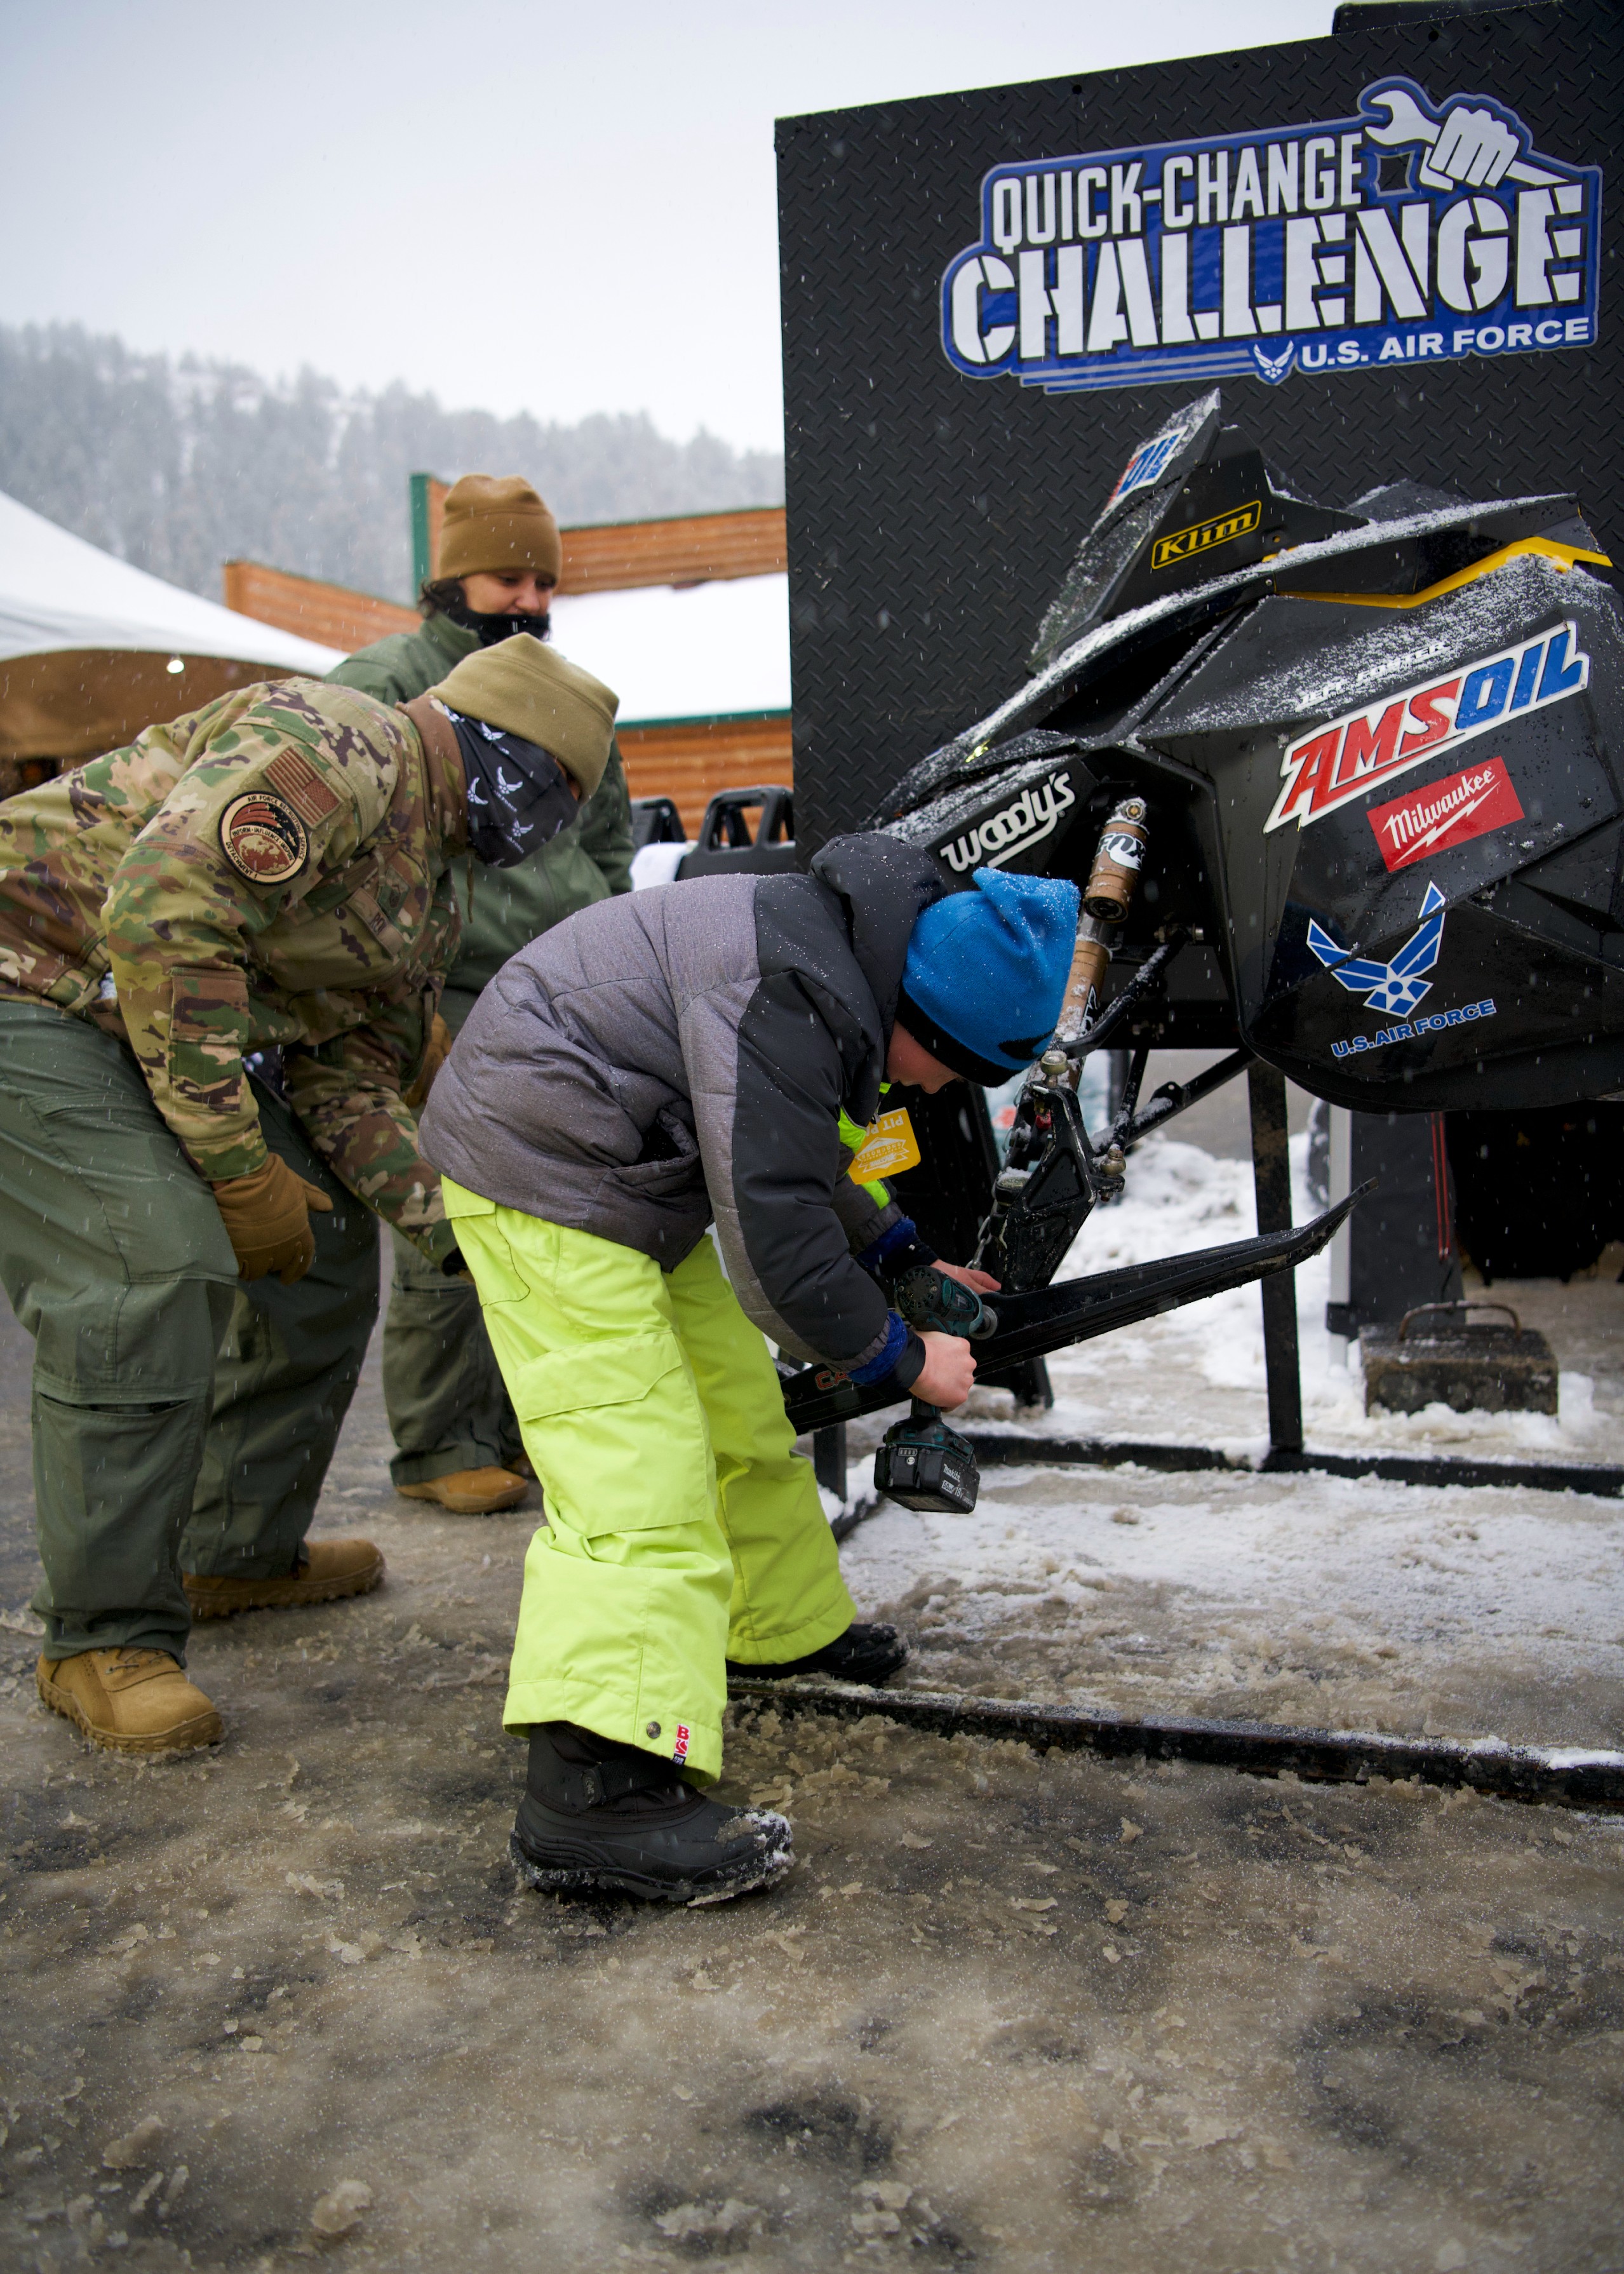 Total Force recruiters bring the heat at Snocross race > Air Force Recruiting Service > Display